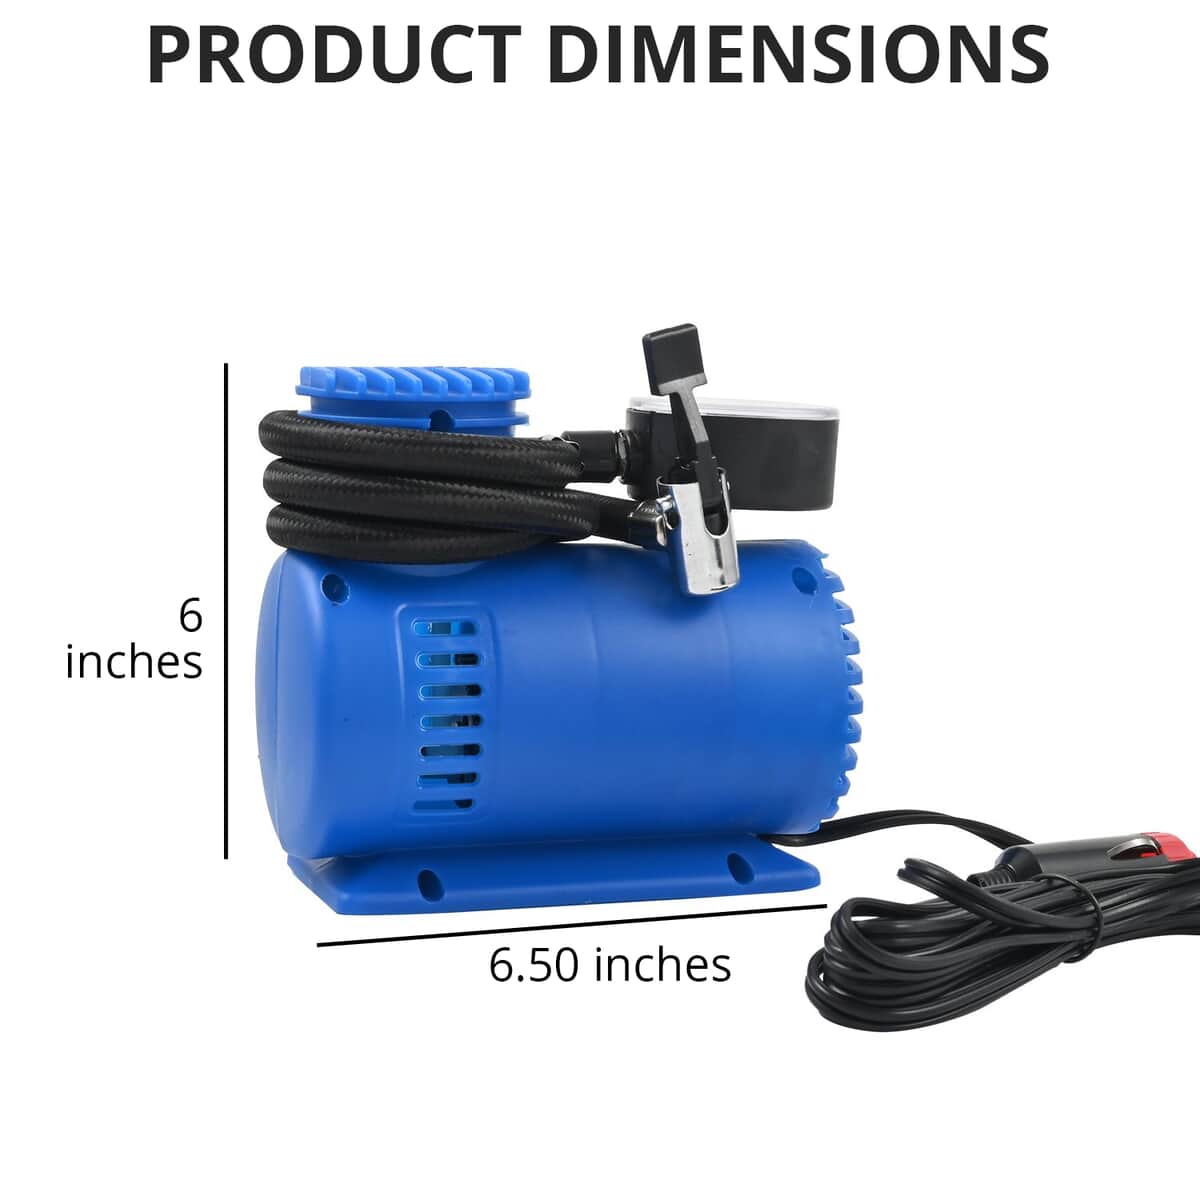 Peuter Voldoen Luidspreker Buy AUTO EFFECTS Blue Portable Mini Air Compressor for Tire Inflation,  12Volt DC Powered, Built-in Pressure Gauge, Inflates Automobile tires, Bike  tires at ShopLC.